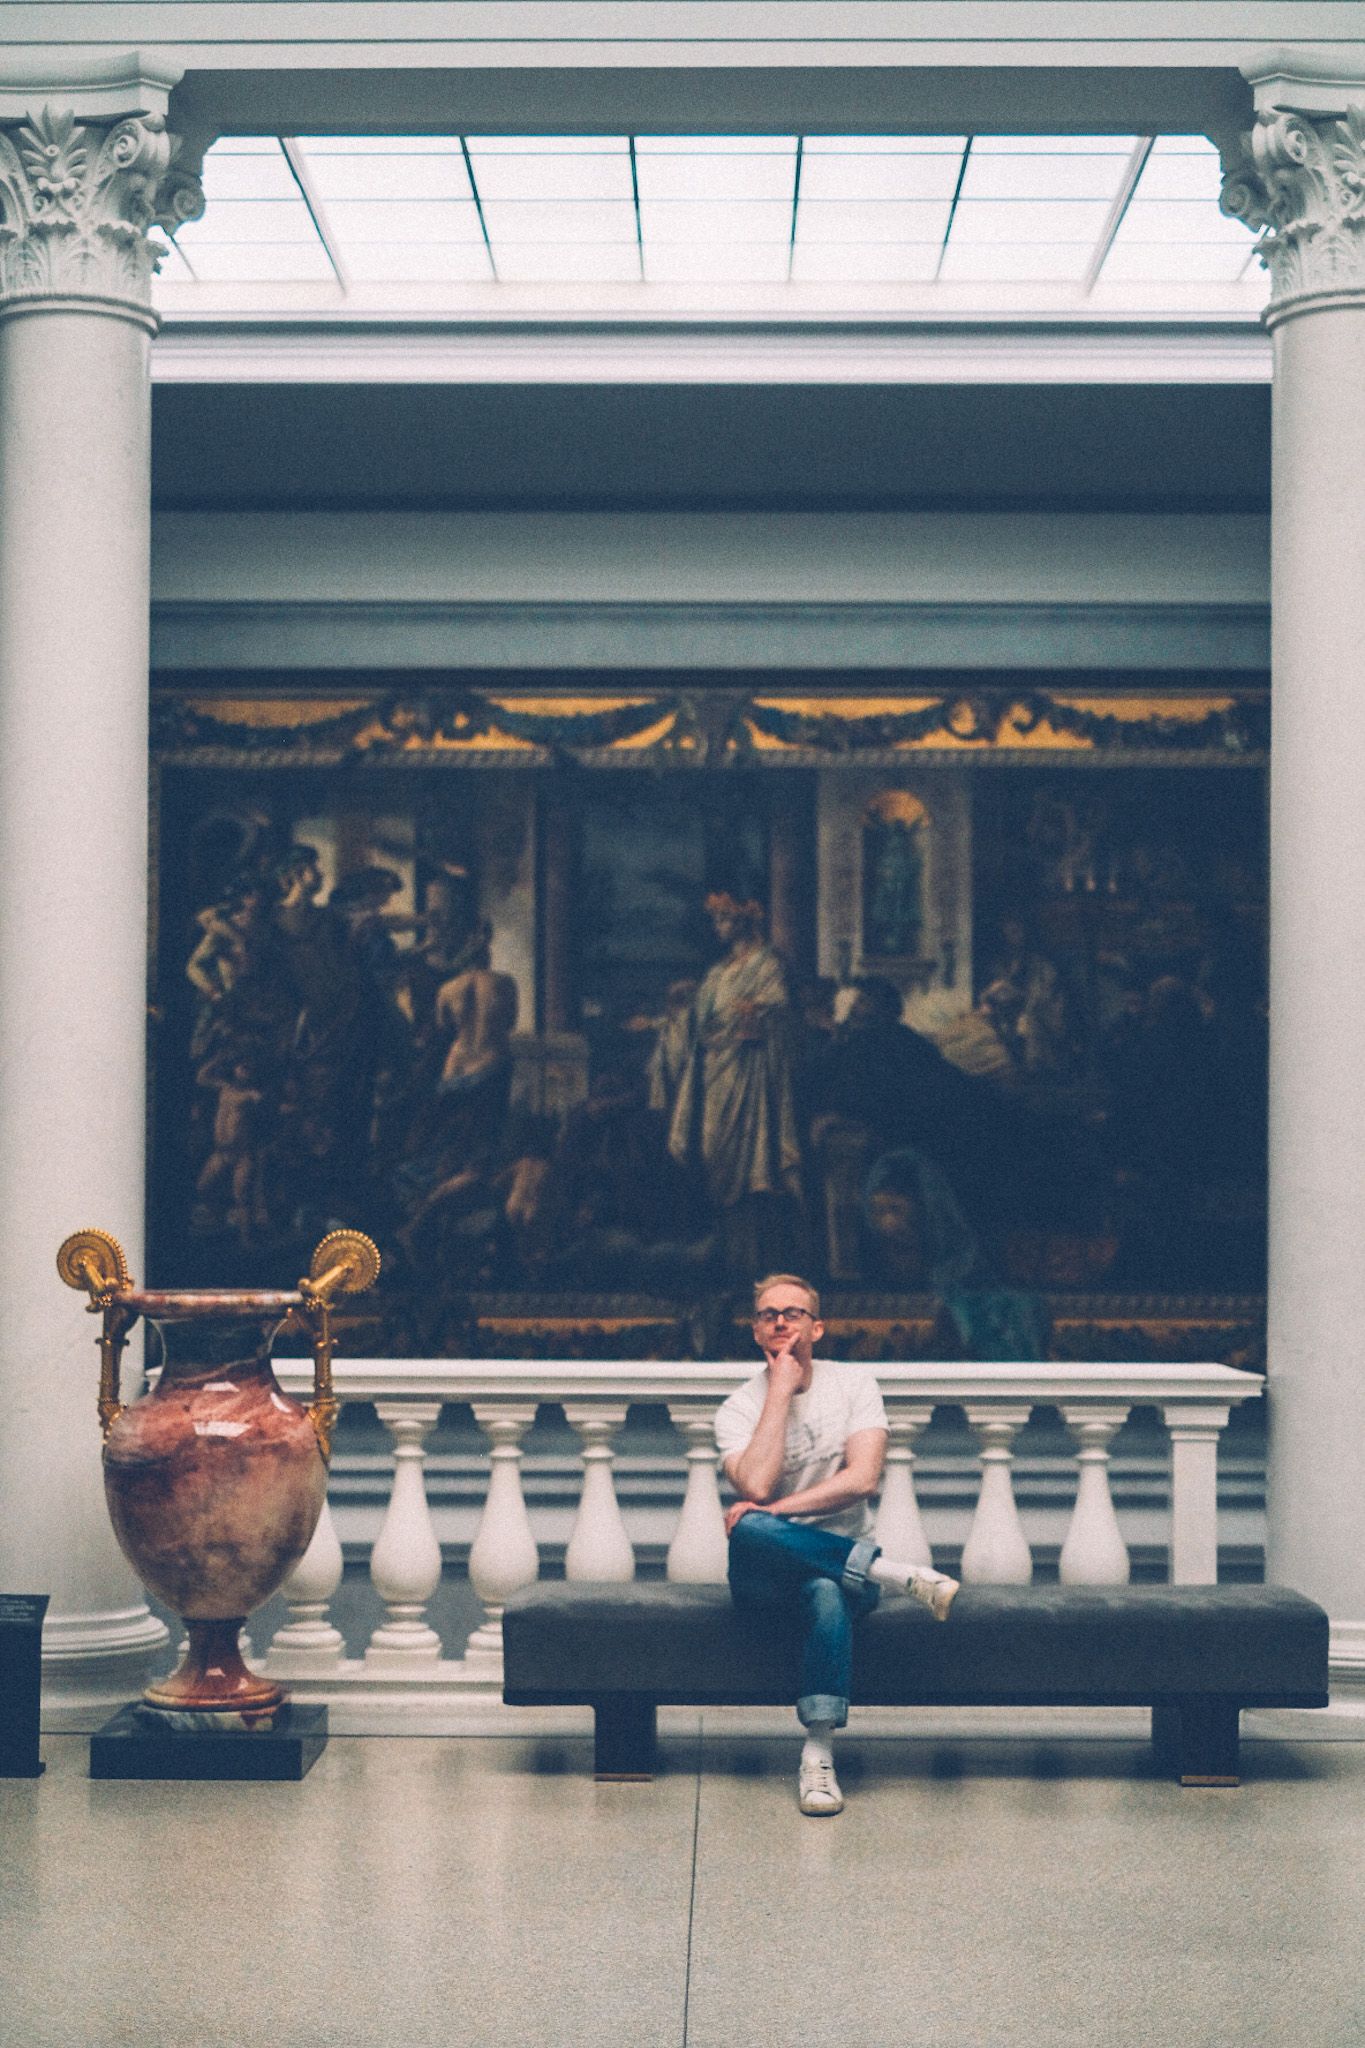 A man sits on a bench in a classic art museum, next to a large vase and in front of a mural, his hand on his chin.